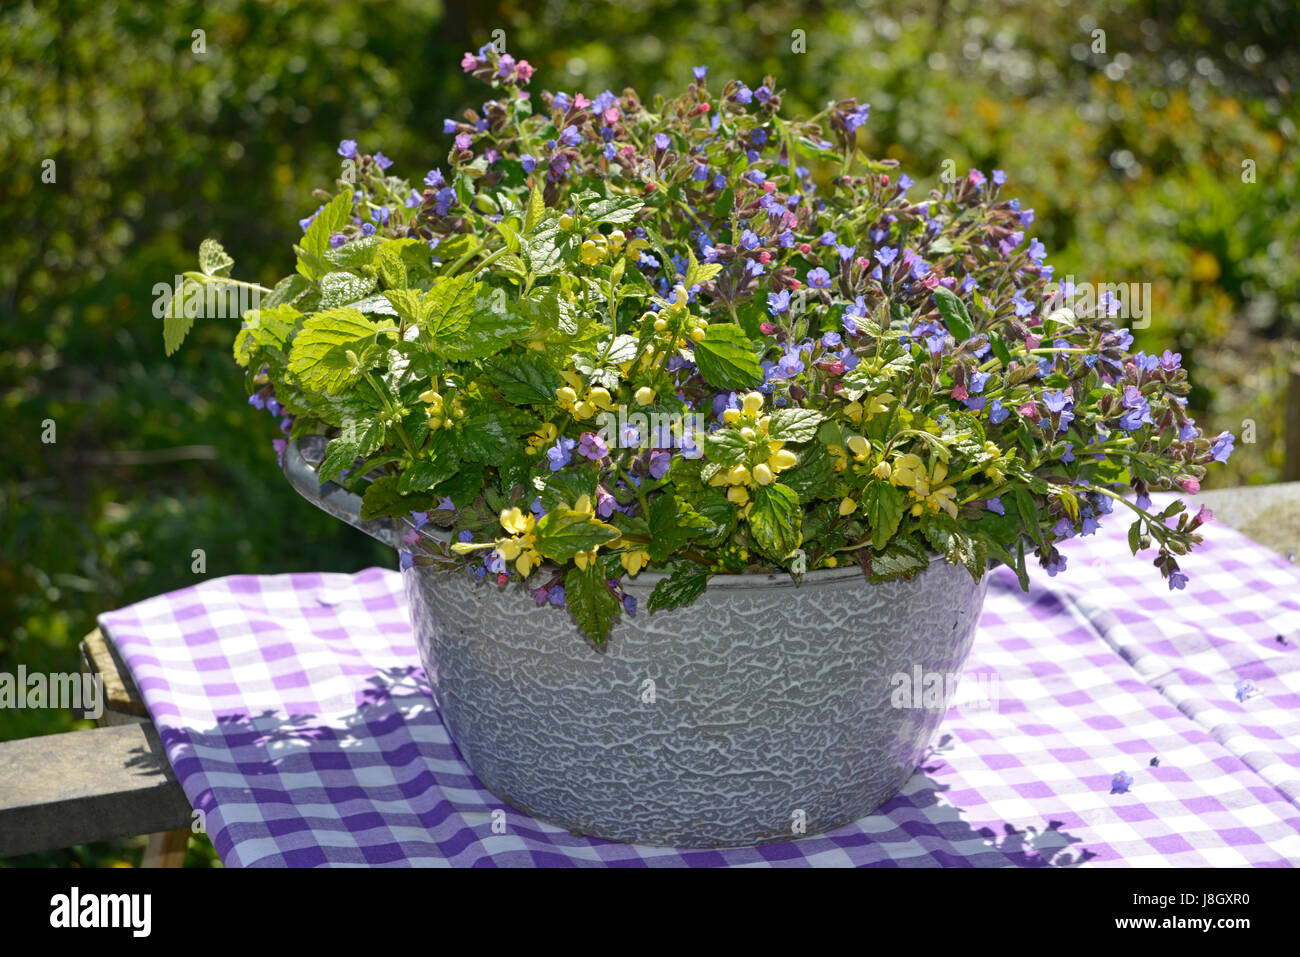 In this pot you can see a combination of Myosotis, more commonly known as forget-me-not flowers, and scorpion grass. Stock Photo